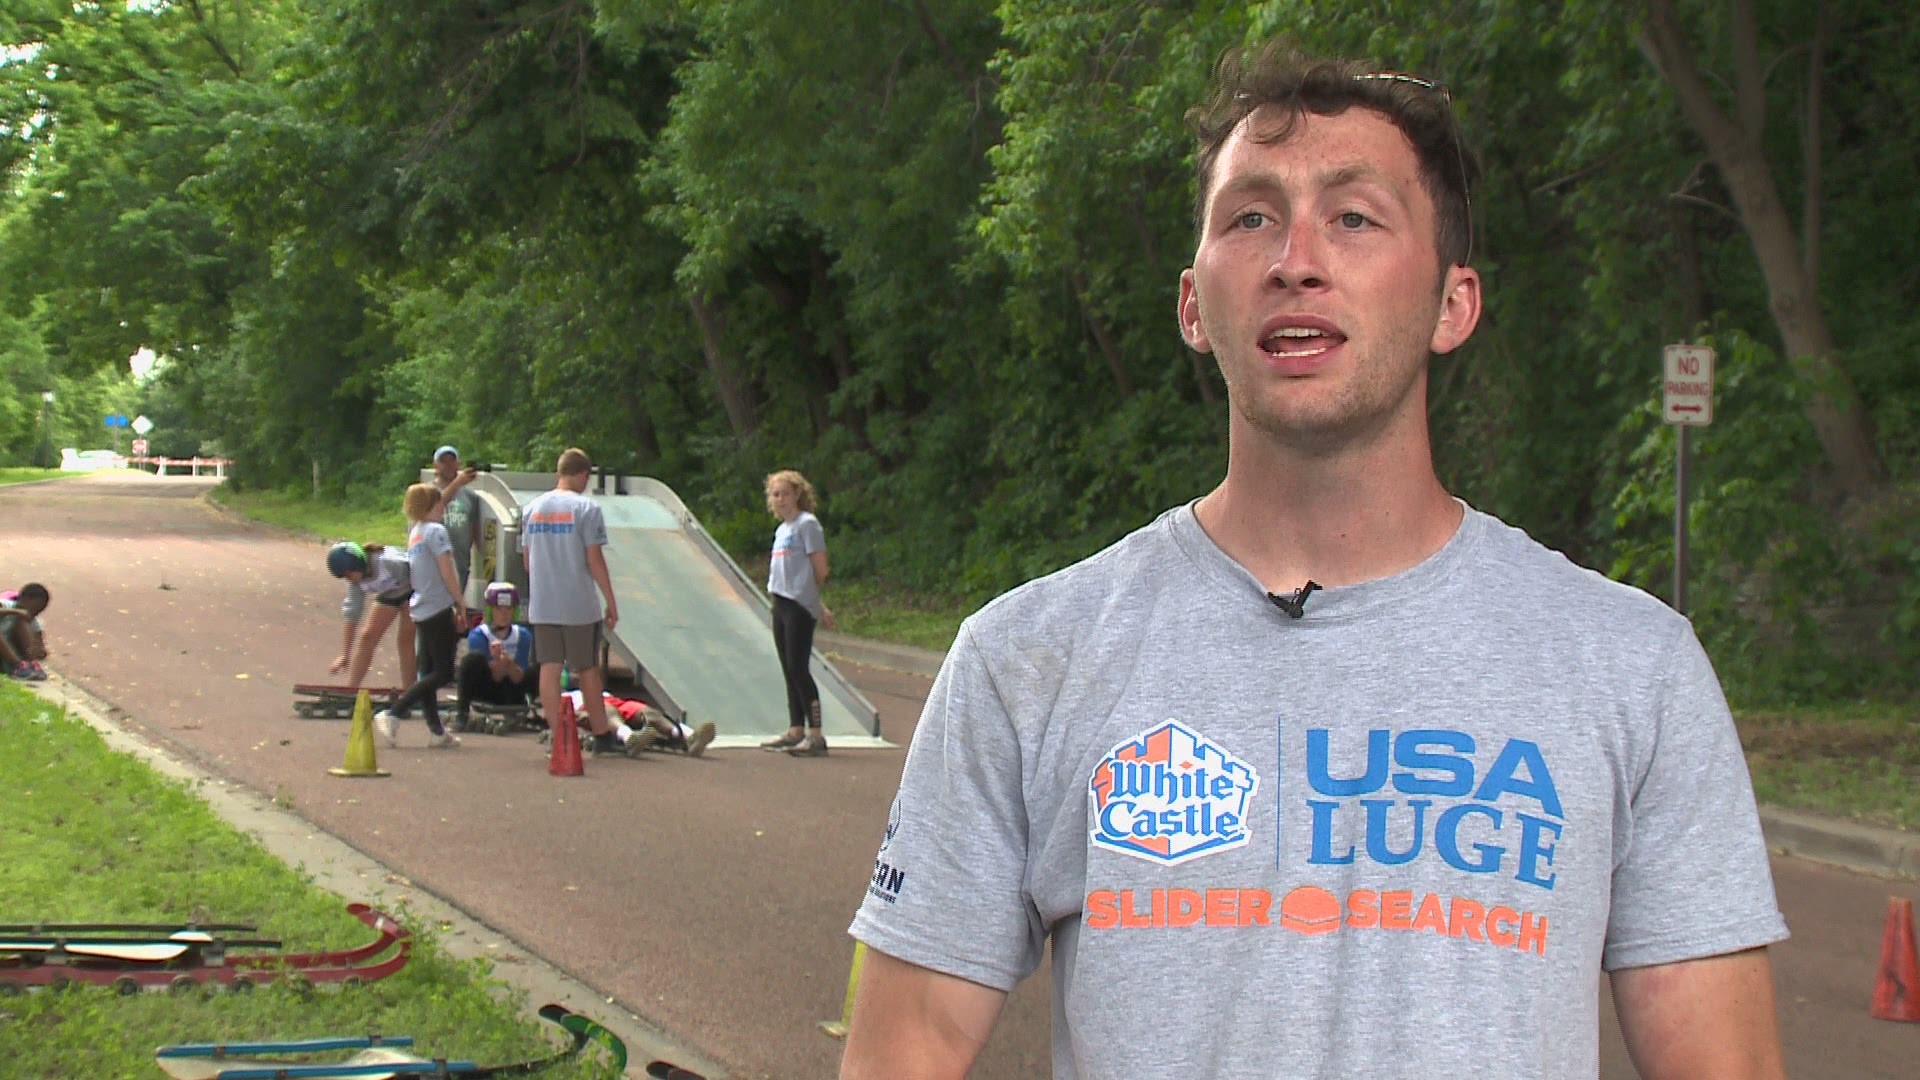 USA Luge Slider search, the team's off-season recruiting tour, rolls through Minneapolis in hopes of finding their new future Olympic athletes.